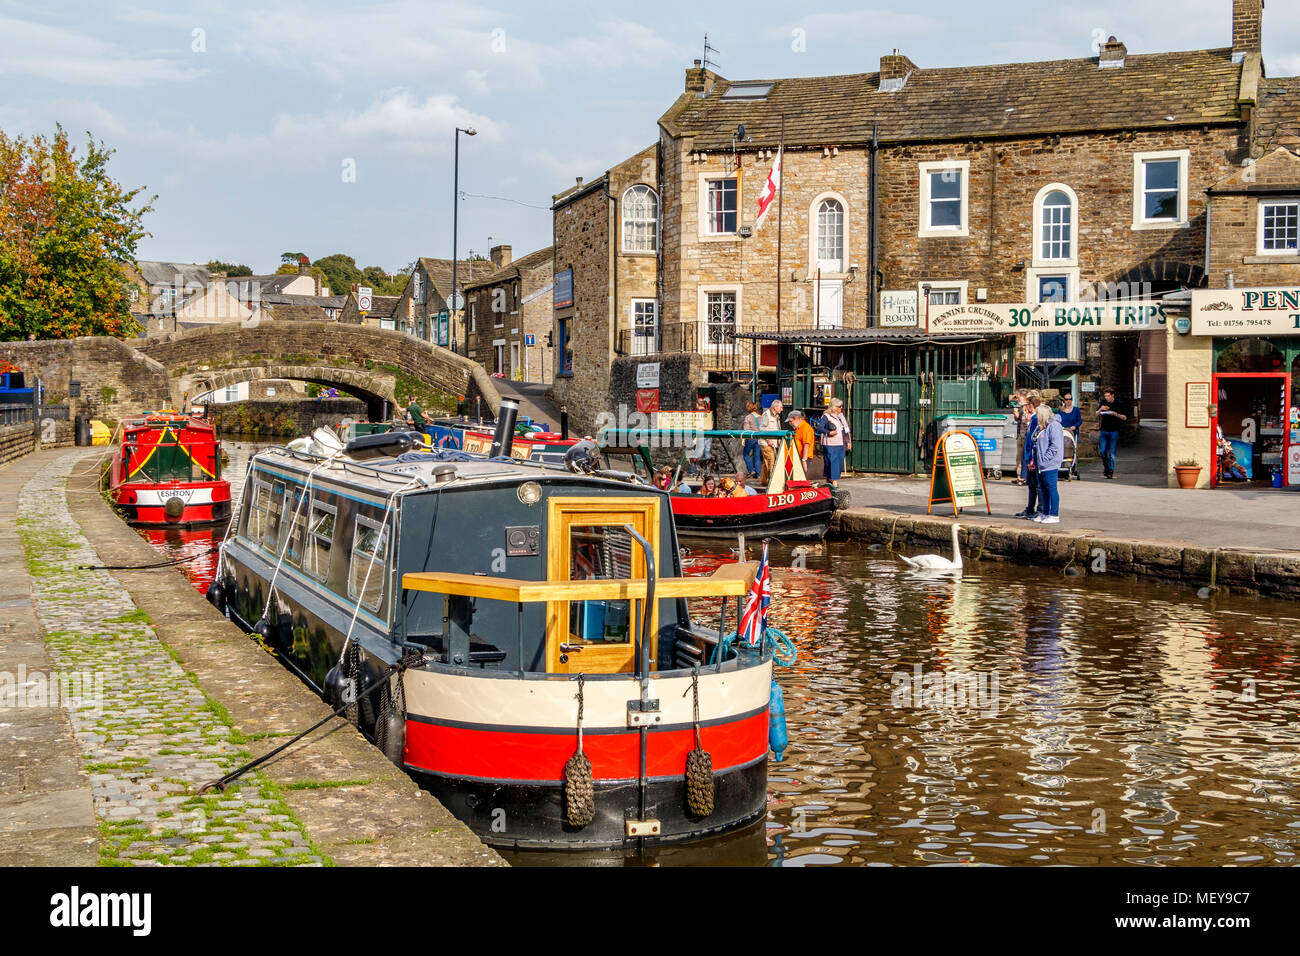 Narrow boats moored on the Leeds and Liverpool Canal at Skipton in North Yorkshire, UK. Stock Photo